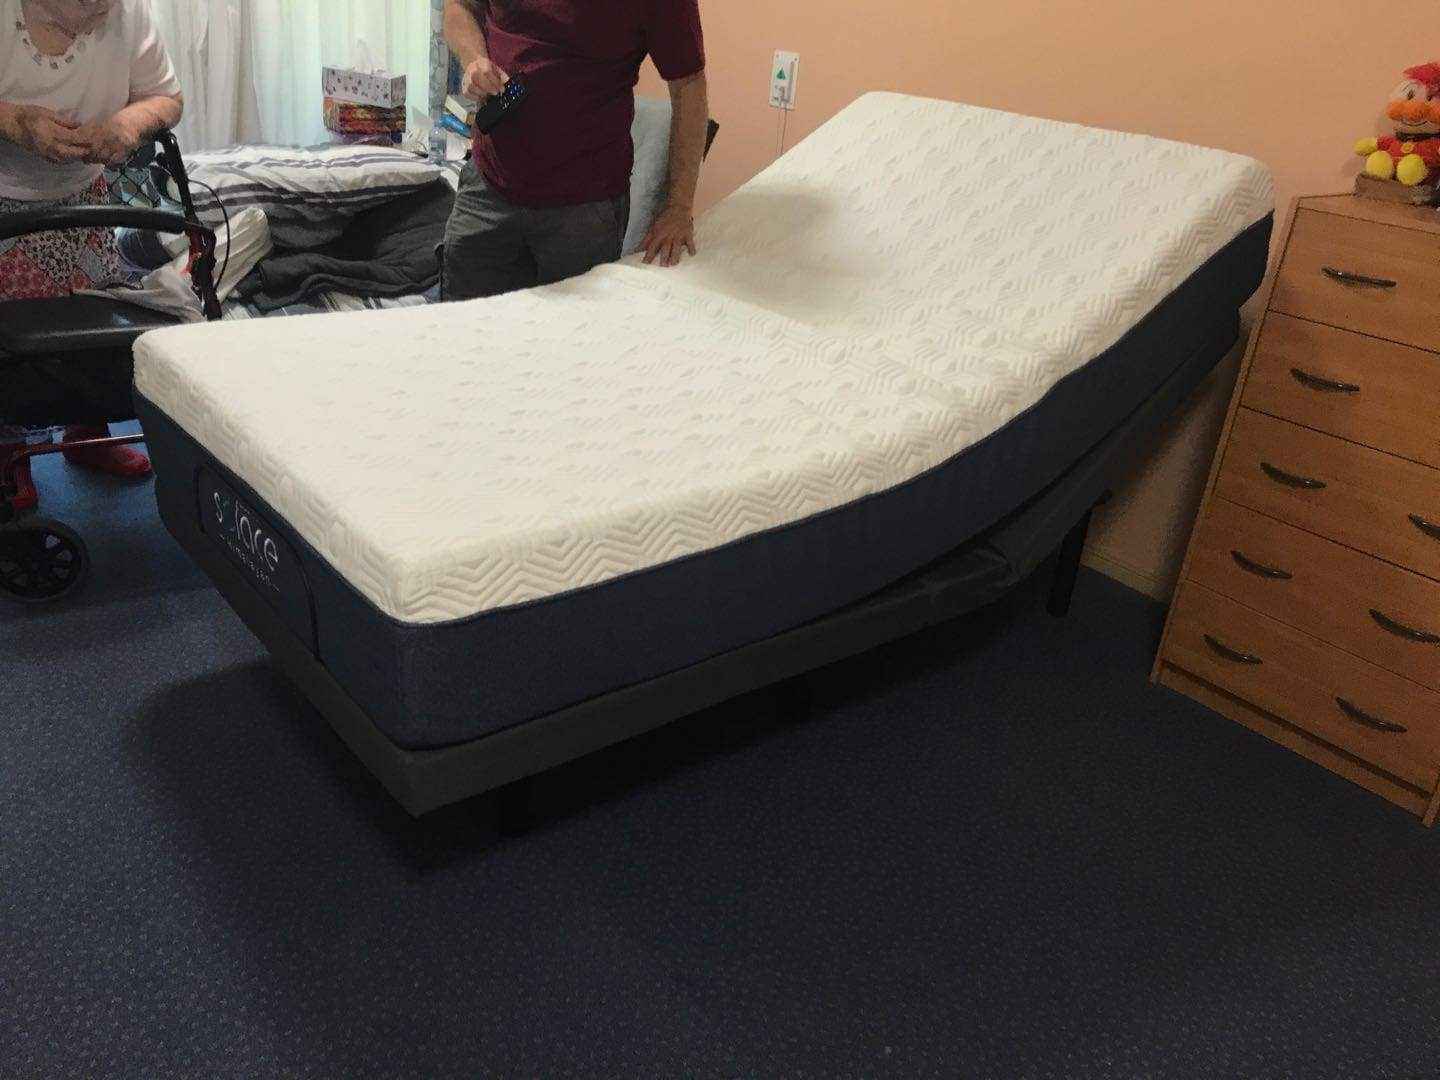 Solace Sleep adjustable bed review demonstration